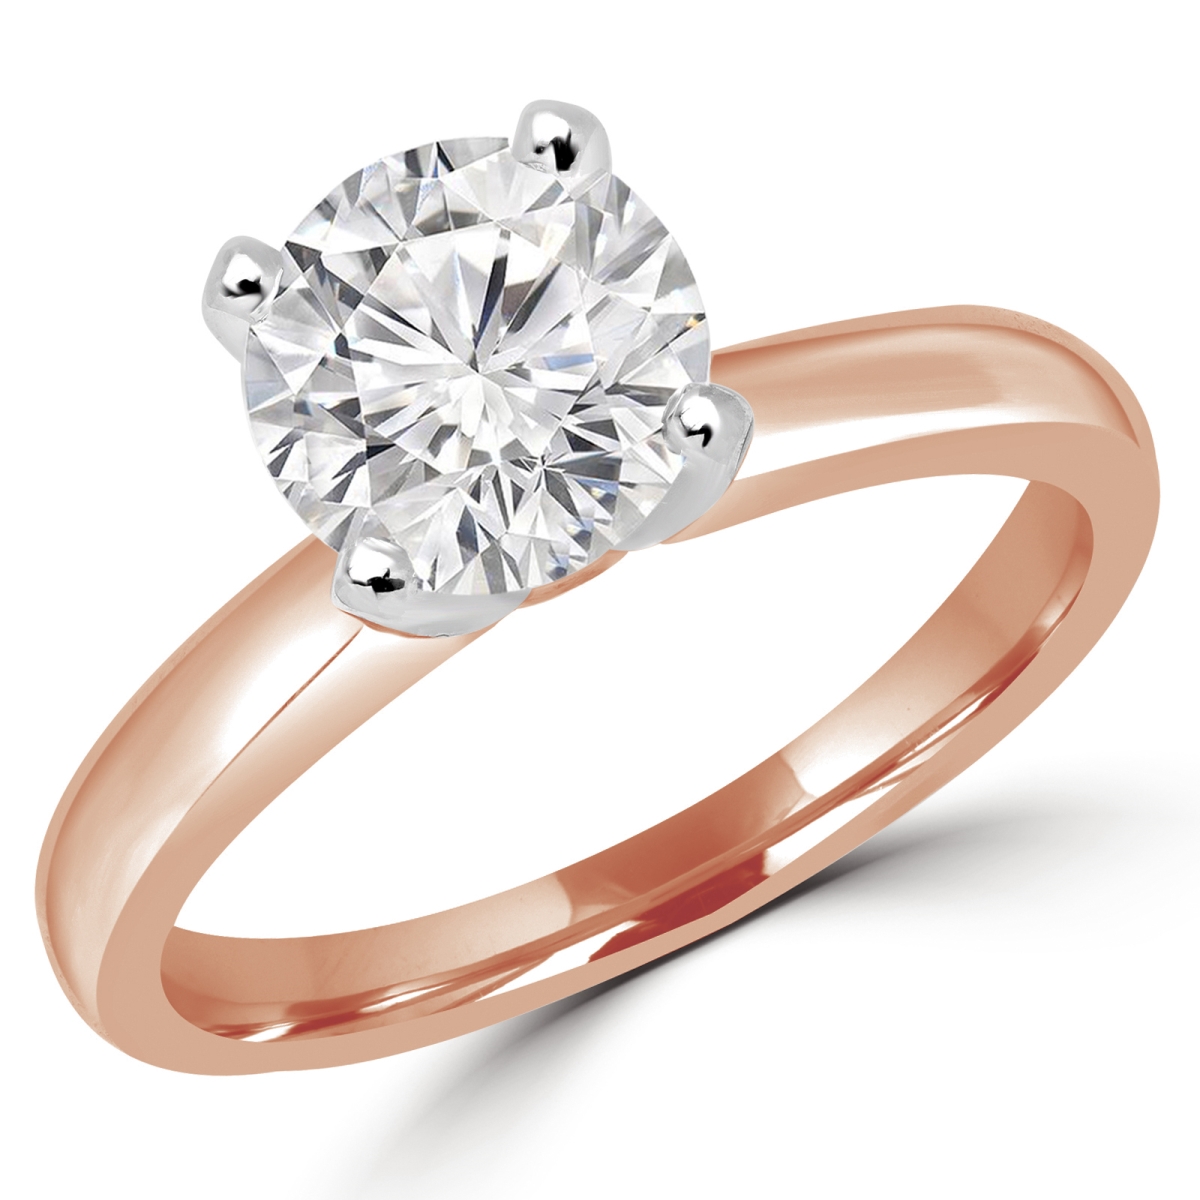 Picture of Majesty Diamonds MD180009-8.25 0.6 CT Round Diamond Solitaire Engagement Ring in 14K Rose Gold - Size 8.25